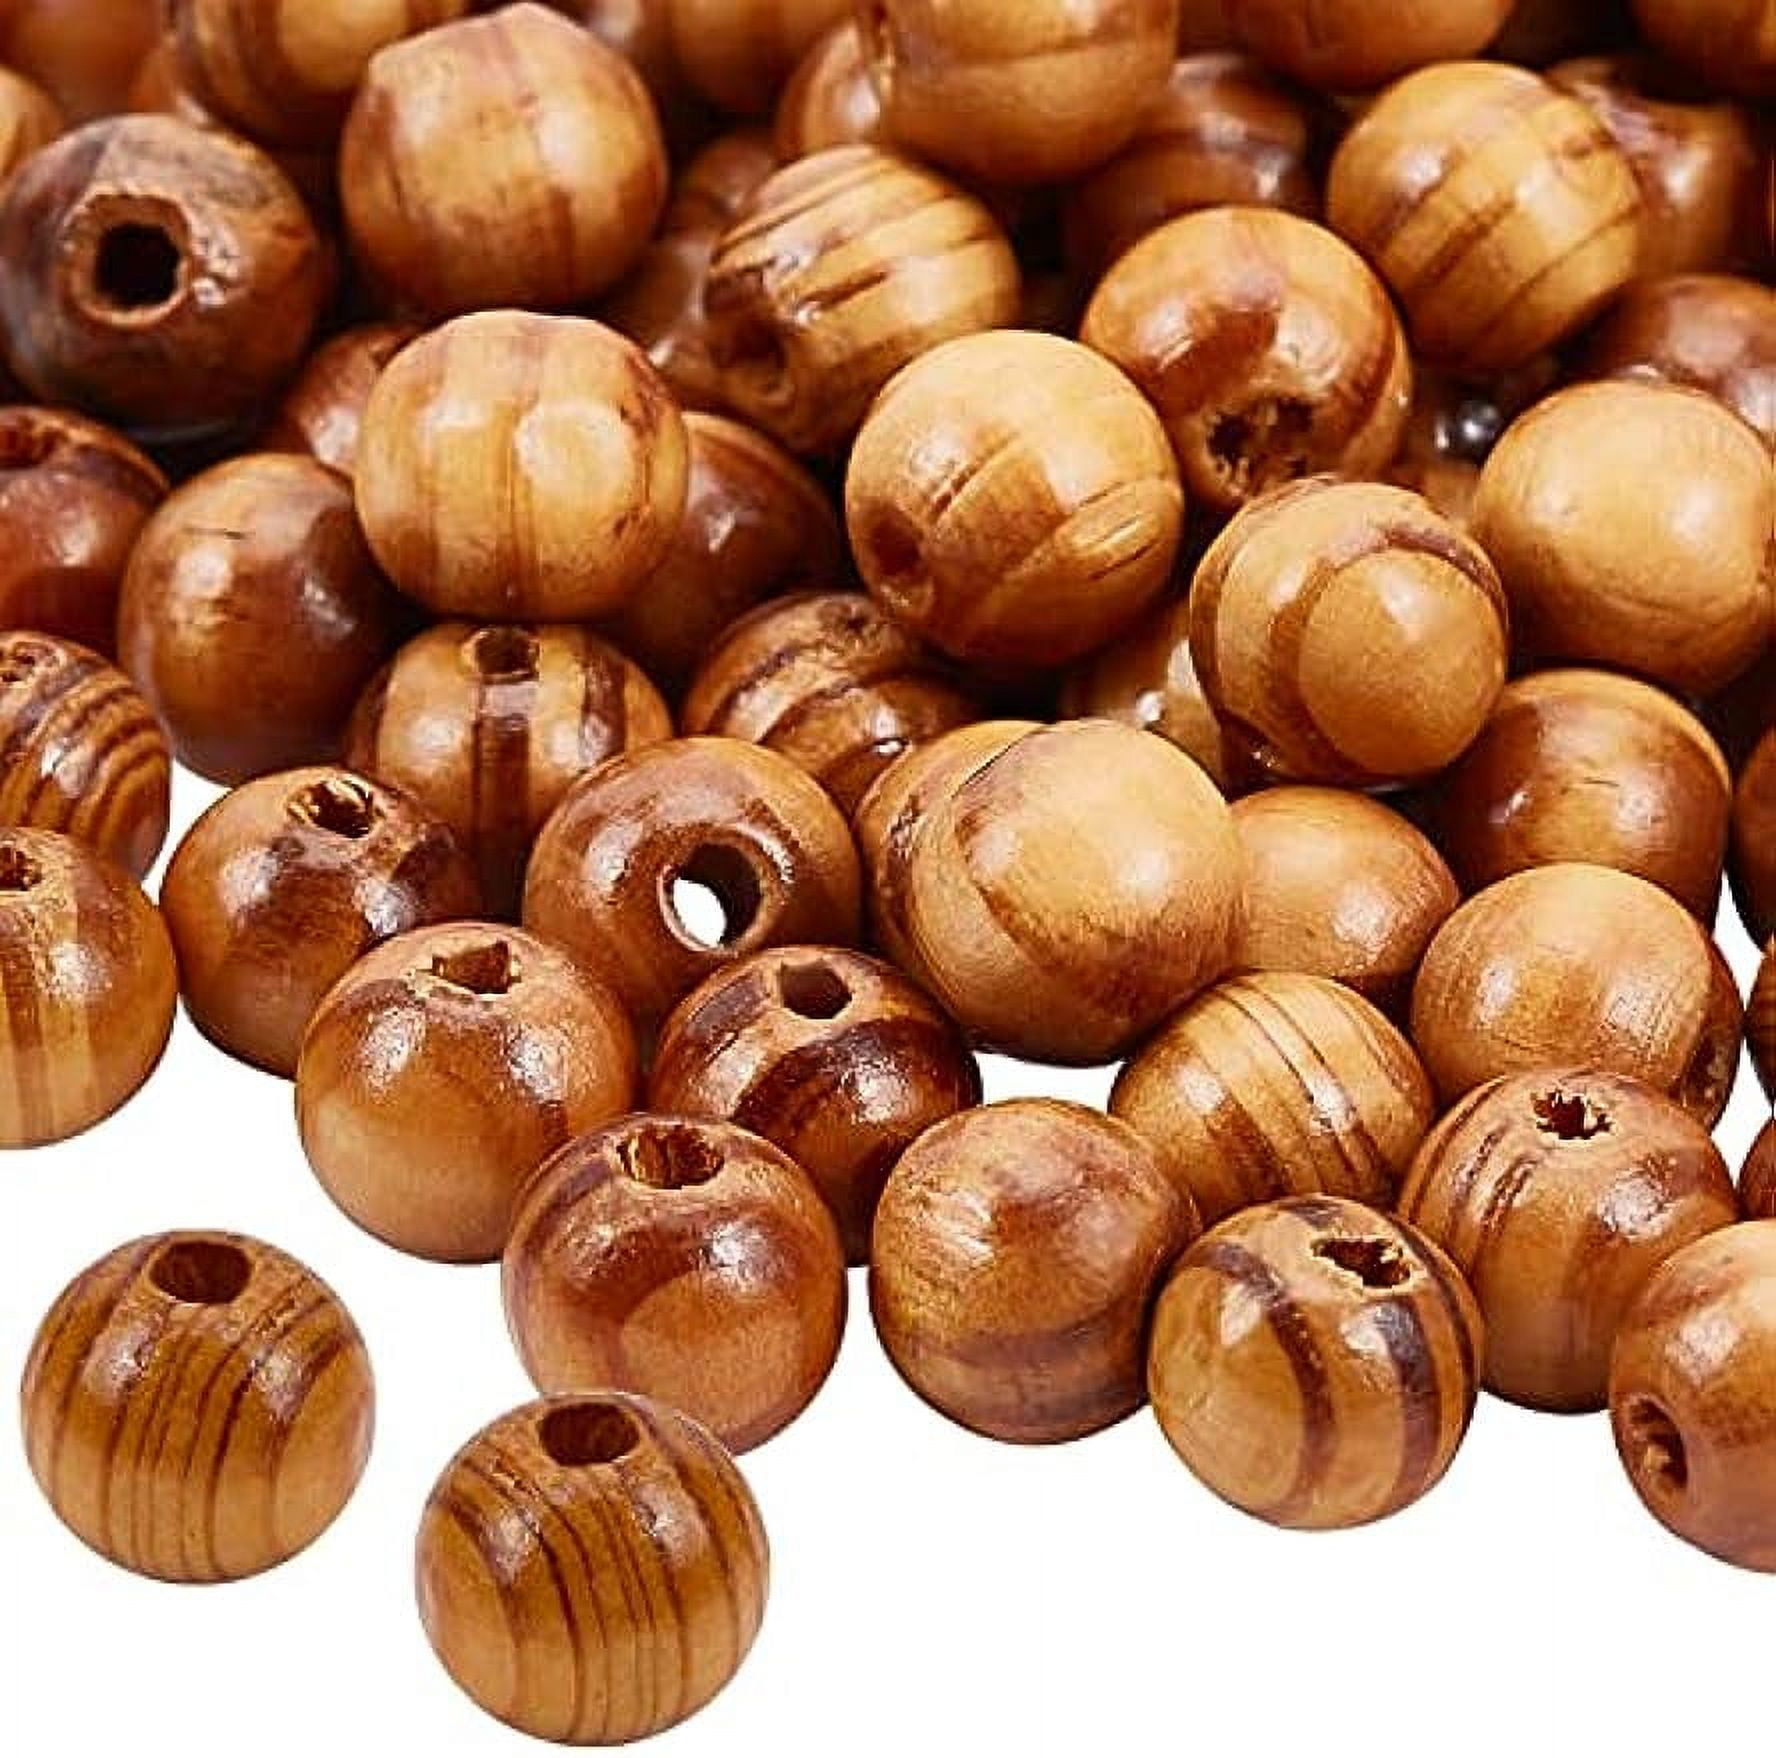 300Pcs Natural Wooden Beads DIY Unfinished Wood Ball Handmade Round  Necklace for Making Jewelry Bracelet Crafts Decorations 